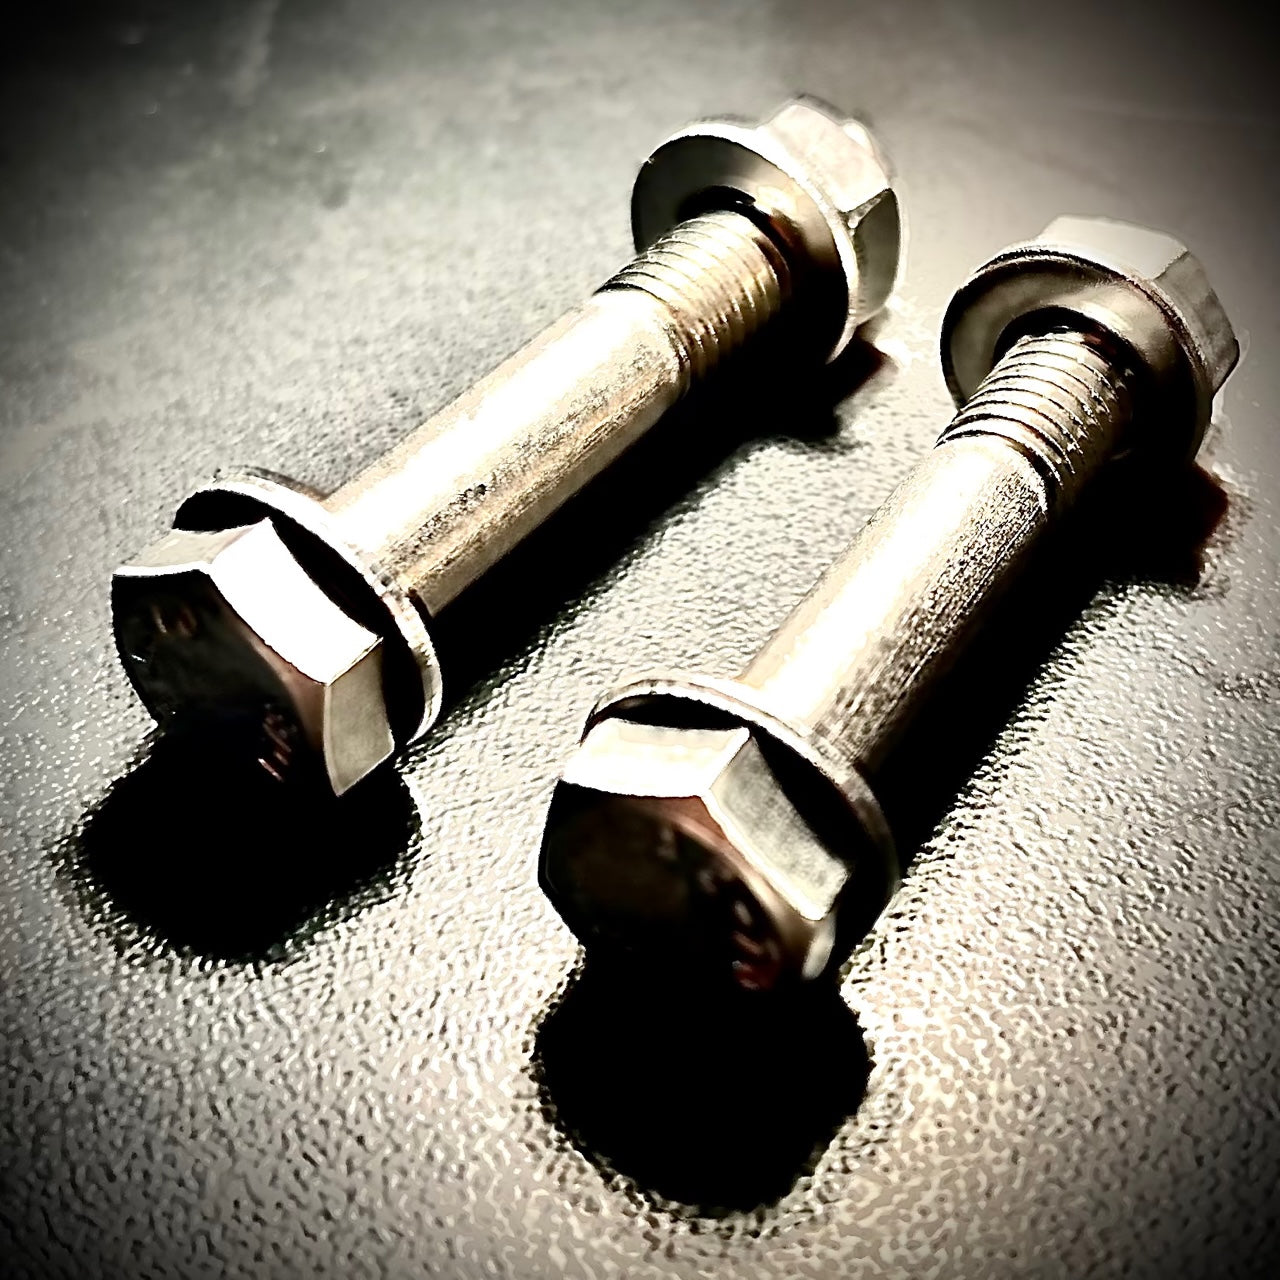 M10 x Under 100mm Hex Bolt plus Nut and Washers A2/ 304 Stainless Steel DIN 931 - Fixaball Ltd. Fixings and Fasteners UK